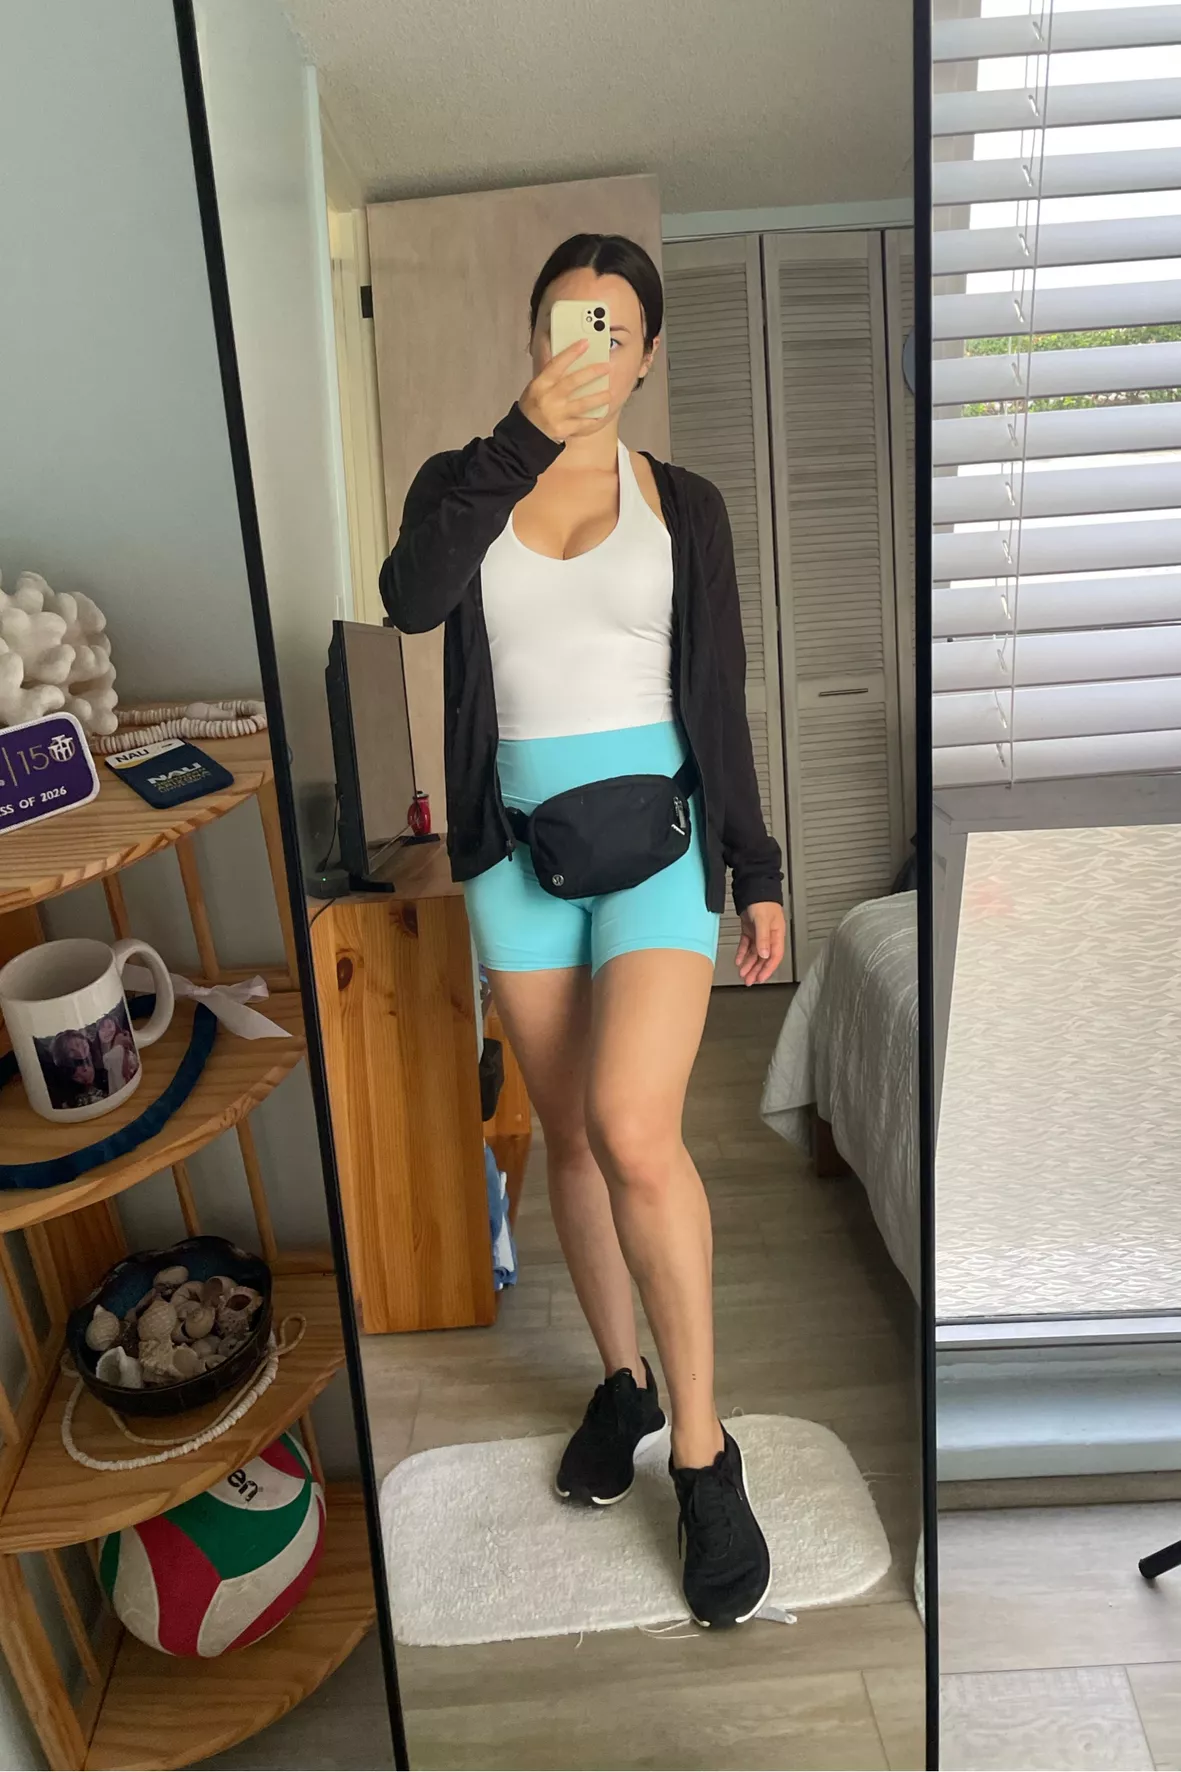 Let's try on compression athleisure wear from @honeylove! As a